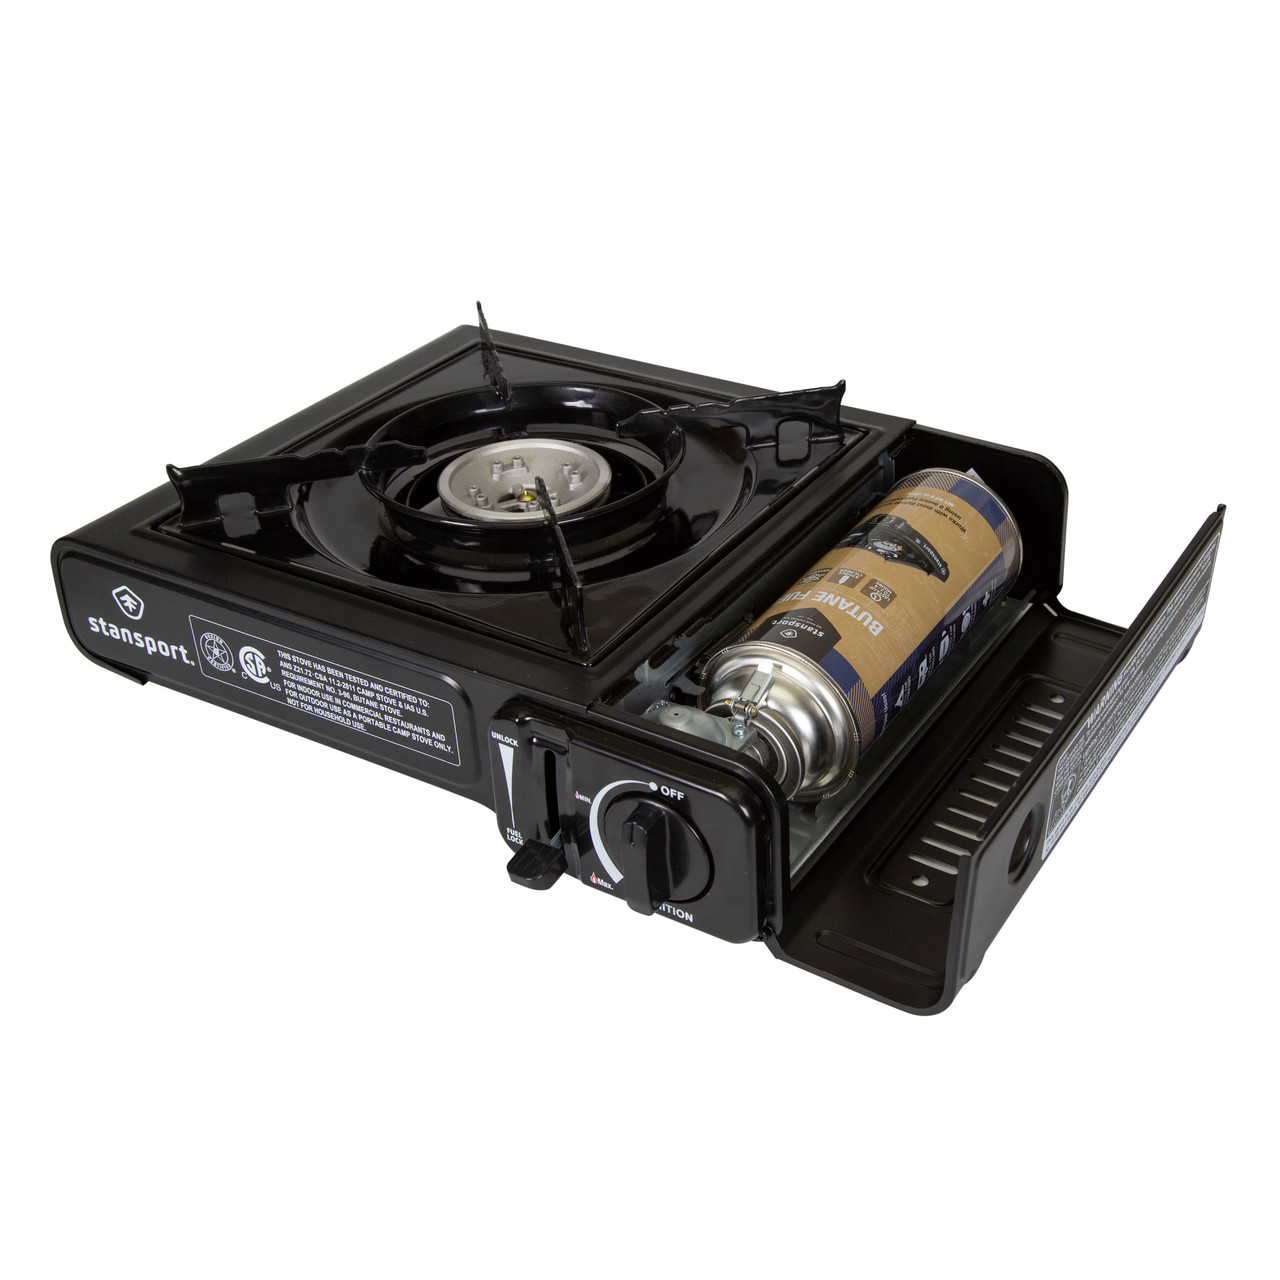 Portable Outdoor Butane Stove - Stansport